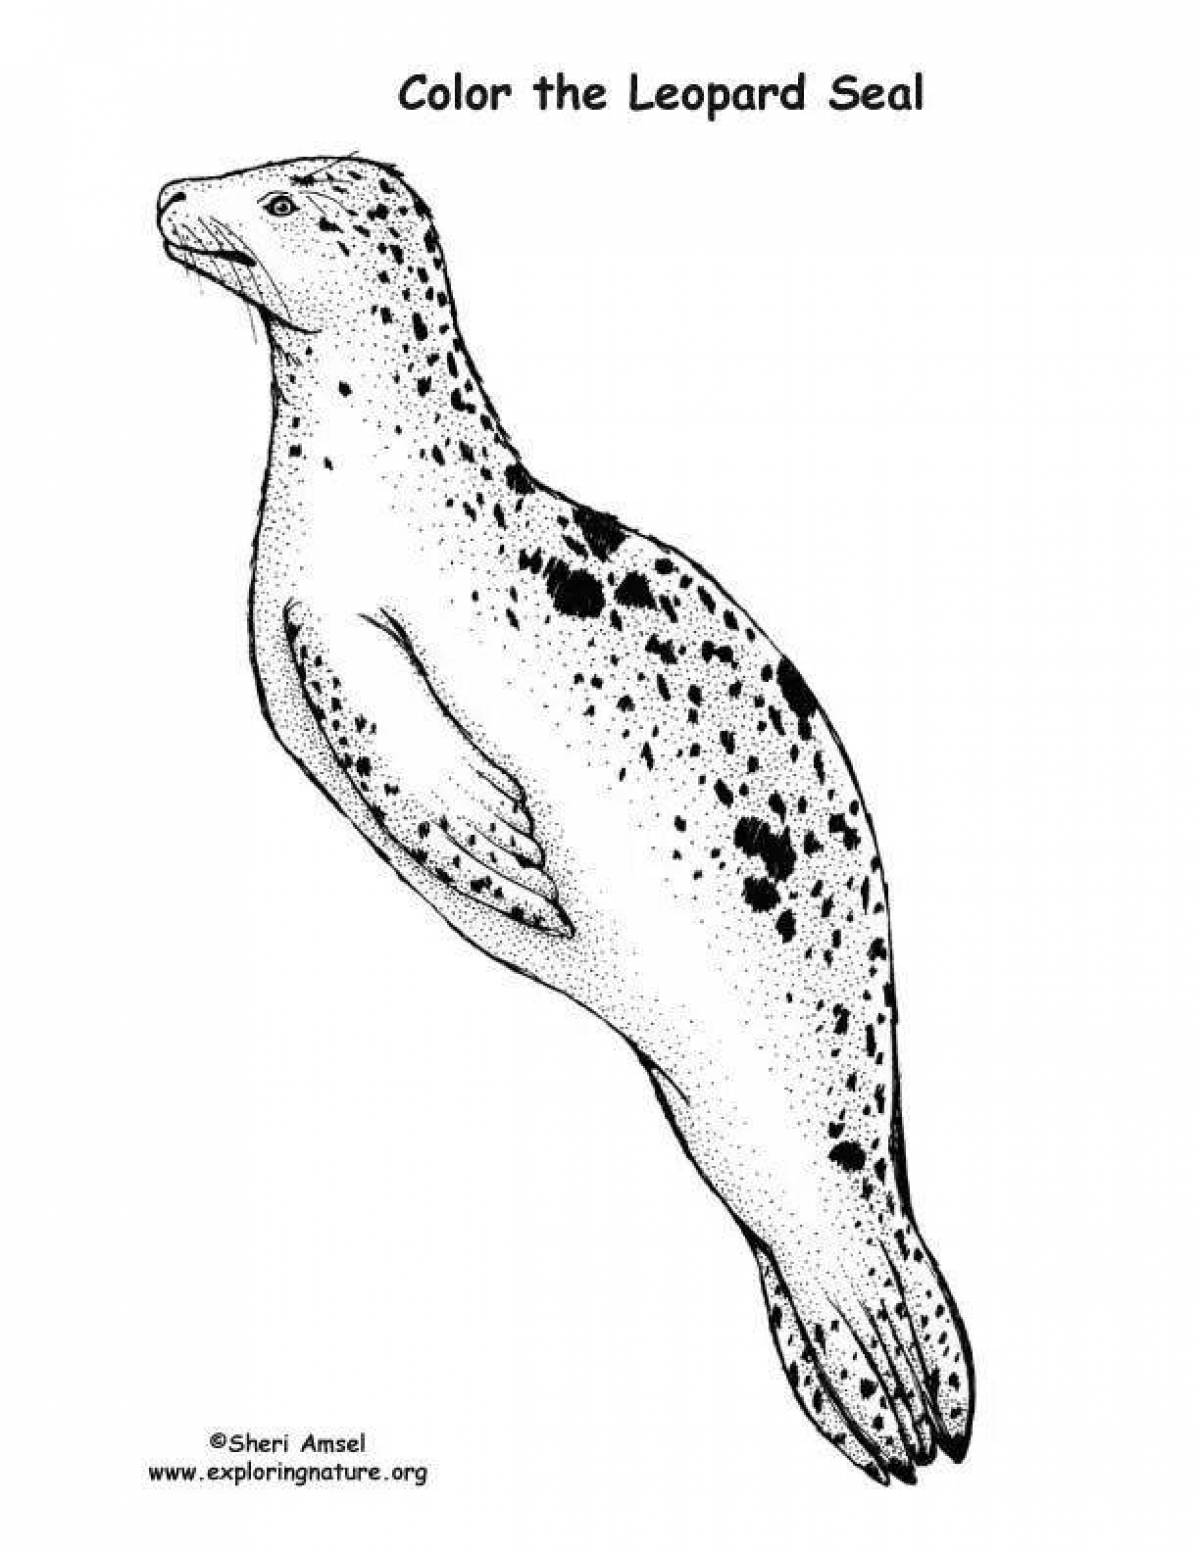 Leopard seal playful coloring page